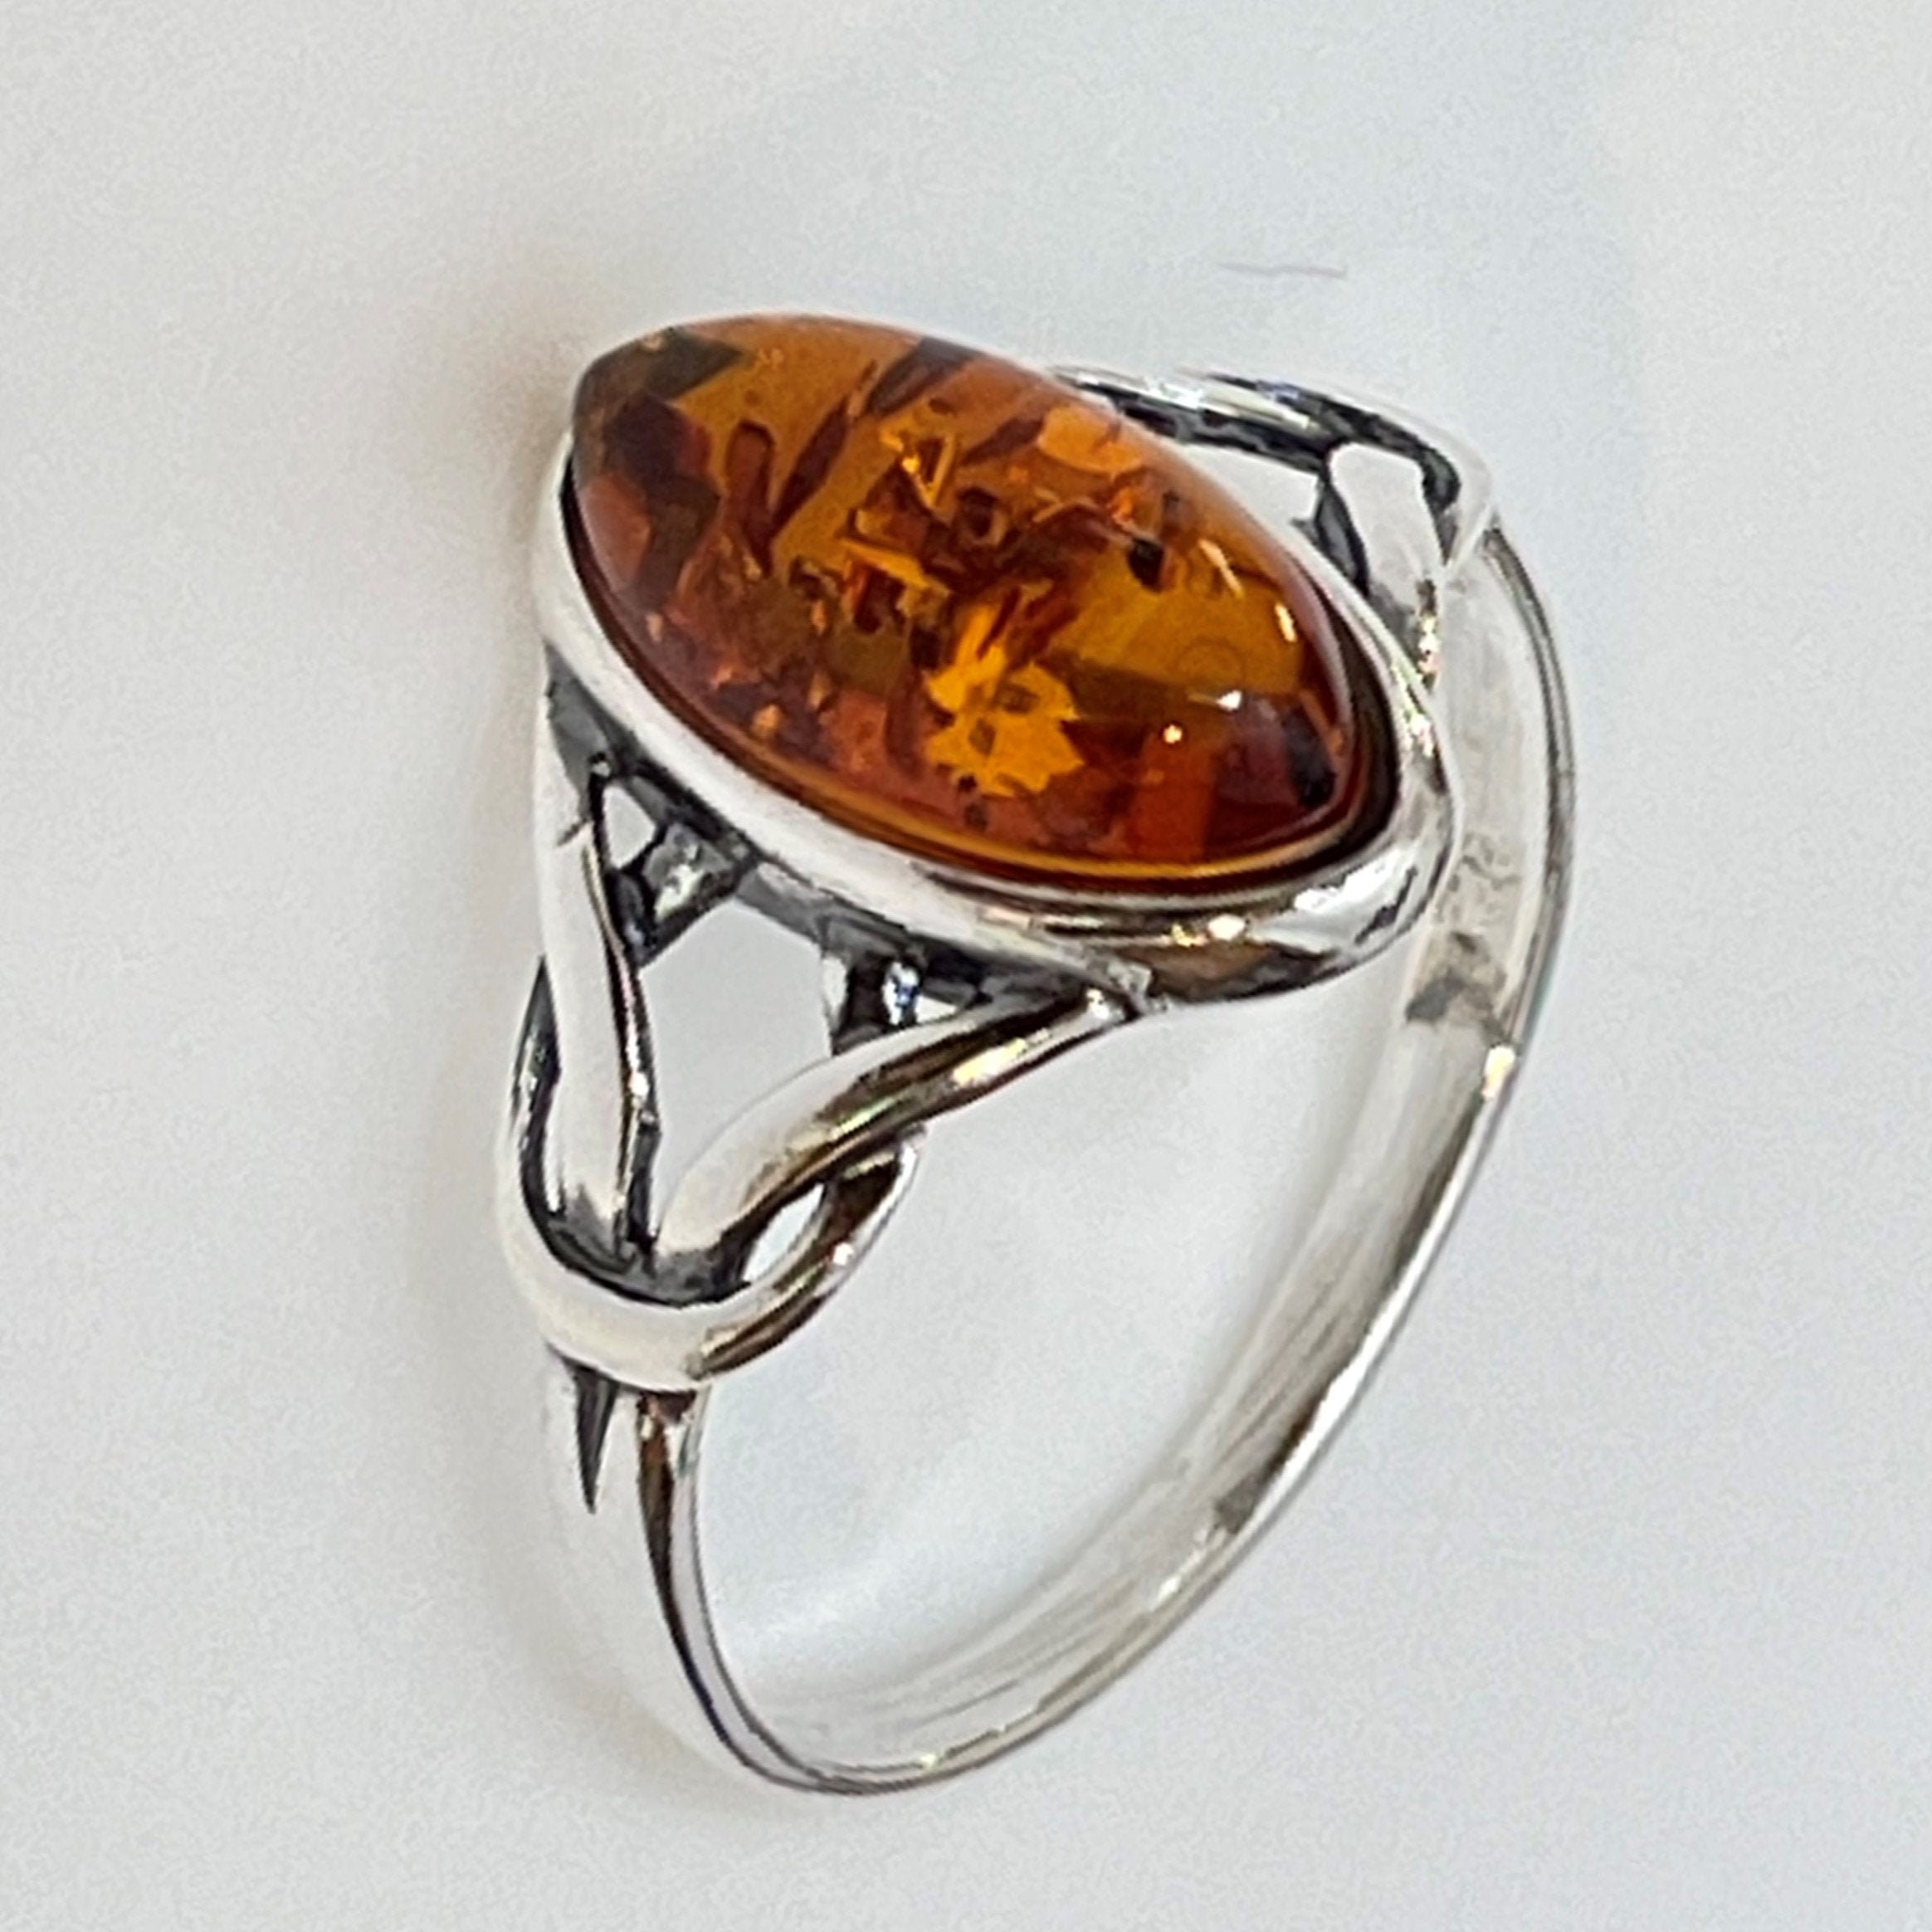 Natural Baltic Amber Infinity Ring Genuine Amber Baltic Amber Jewelry Romantic Stone Gift Amber Silver Ring Women's Jewelry